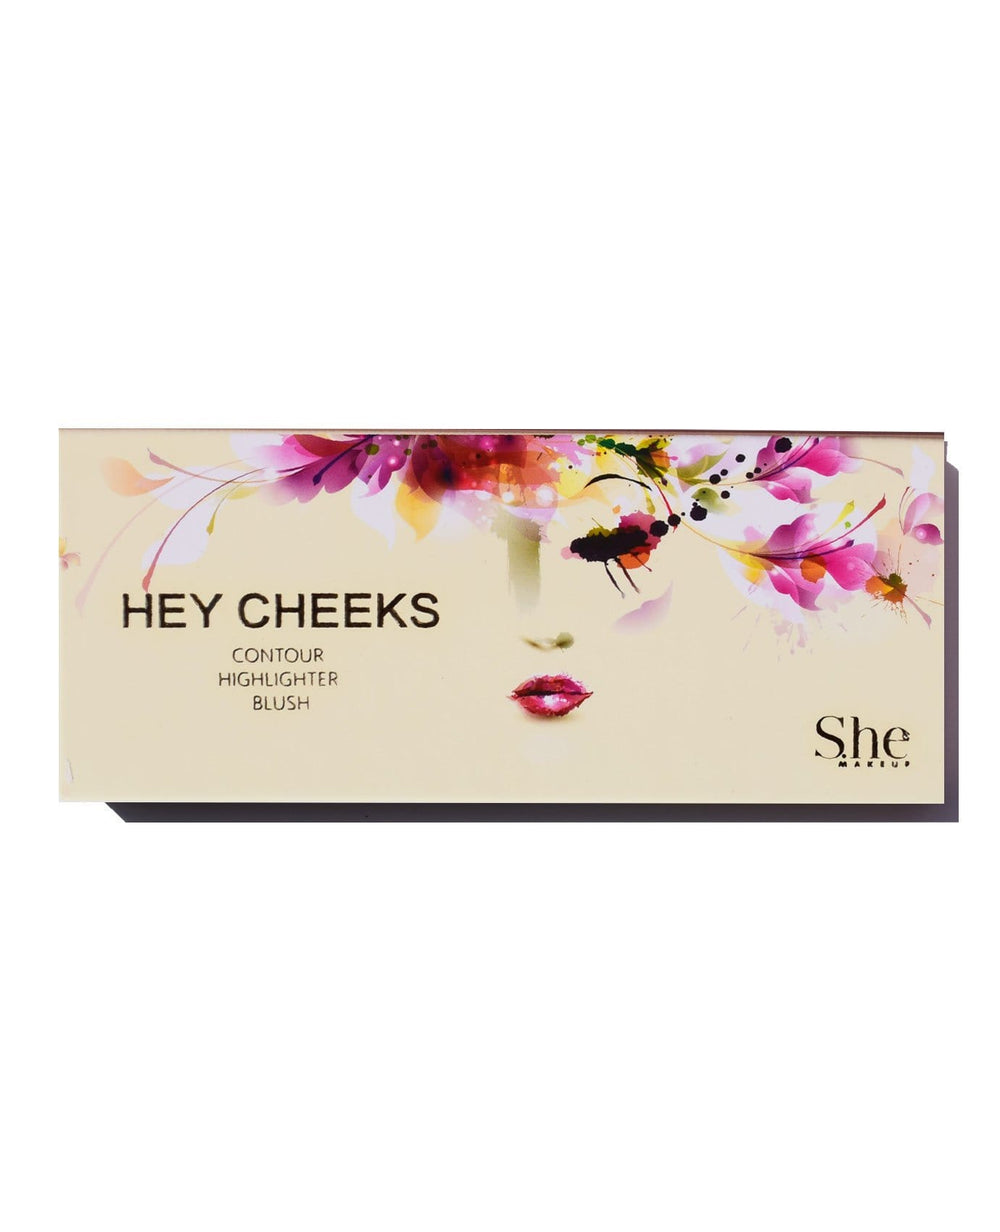 S.he Hey Cheeks Face Palette